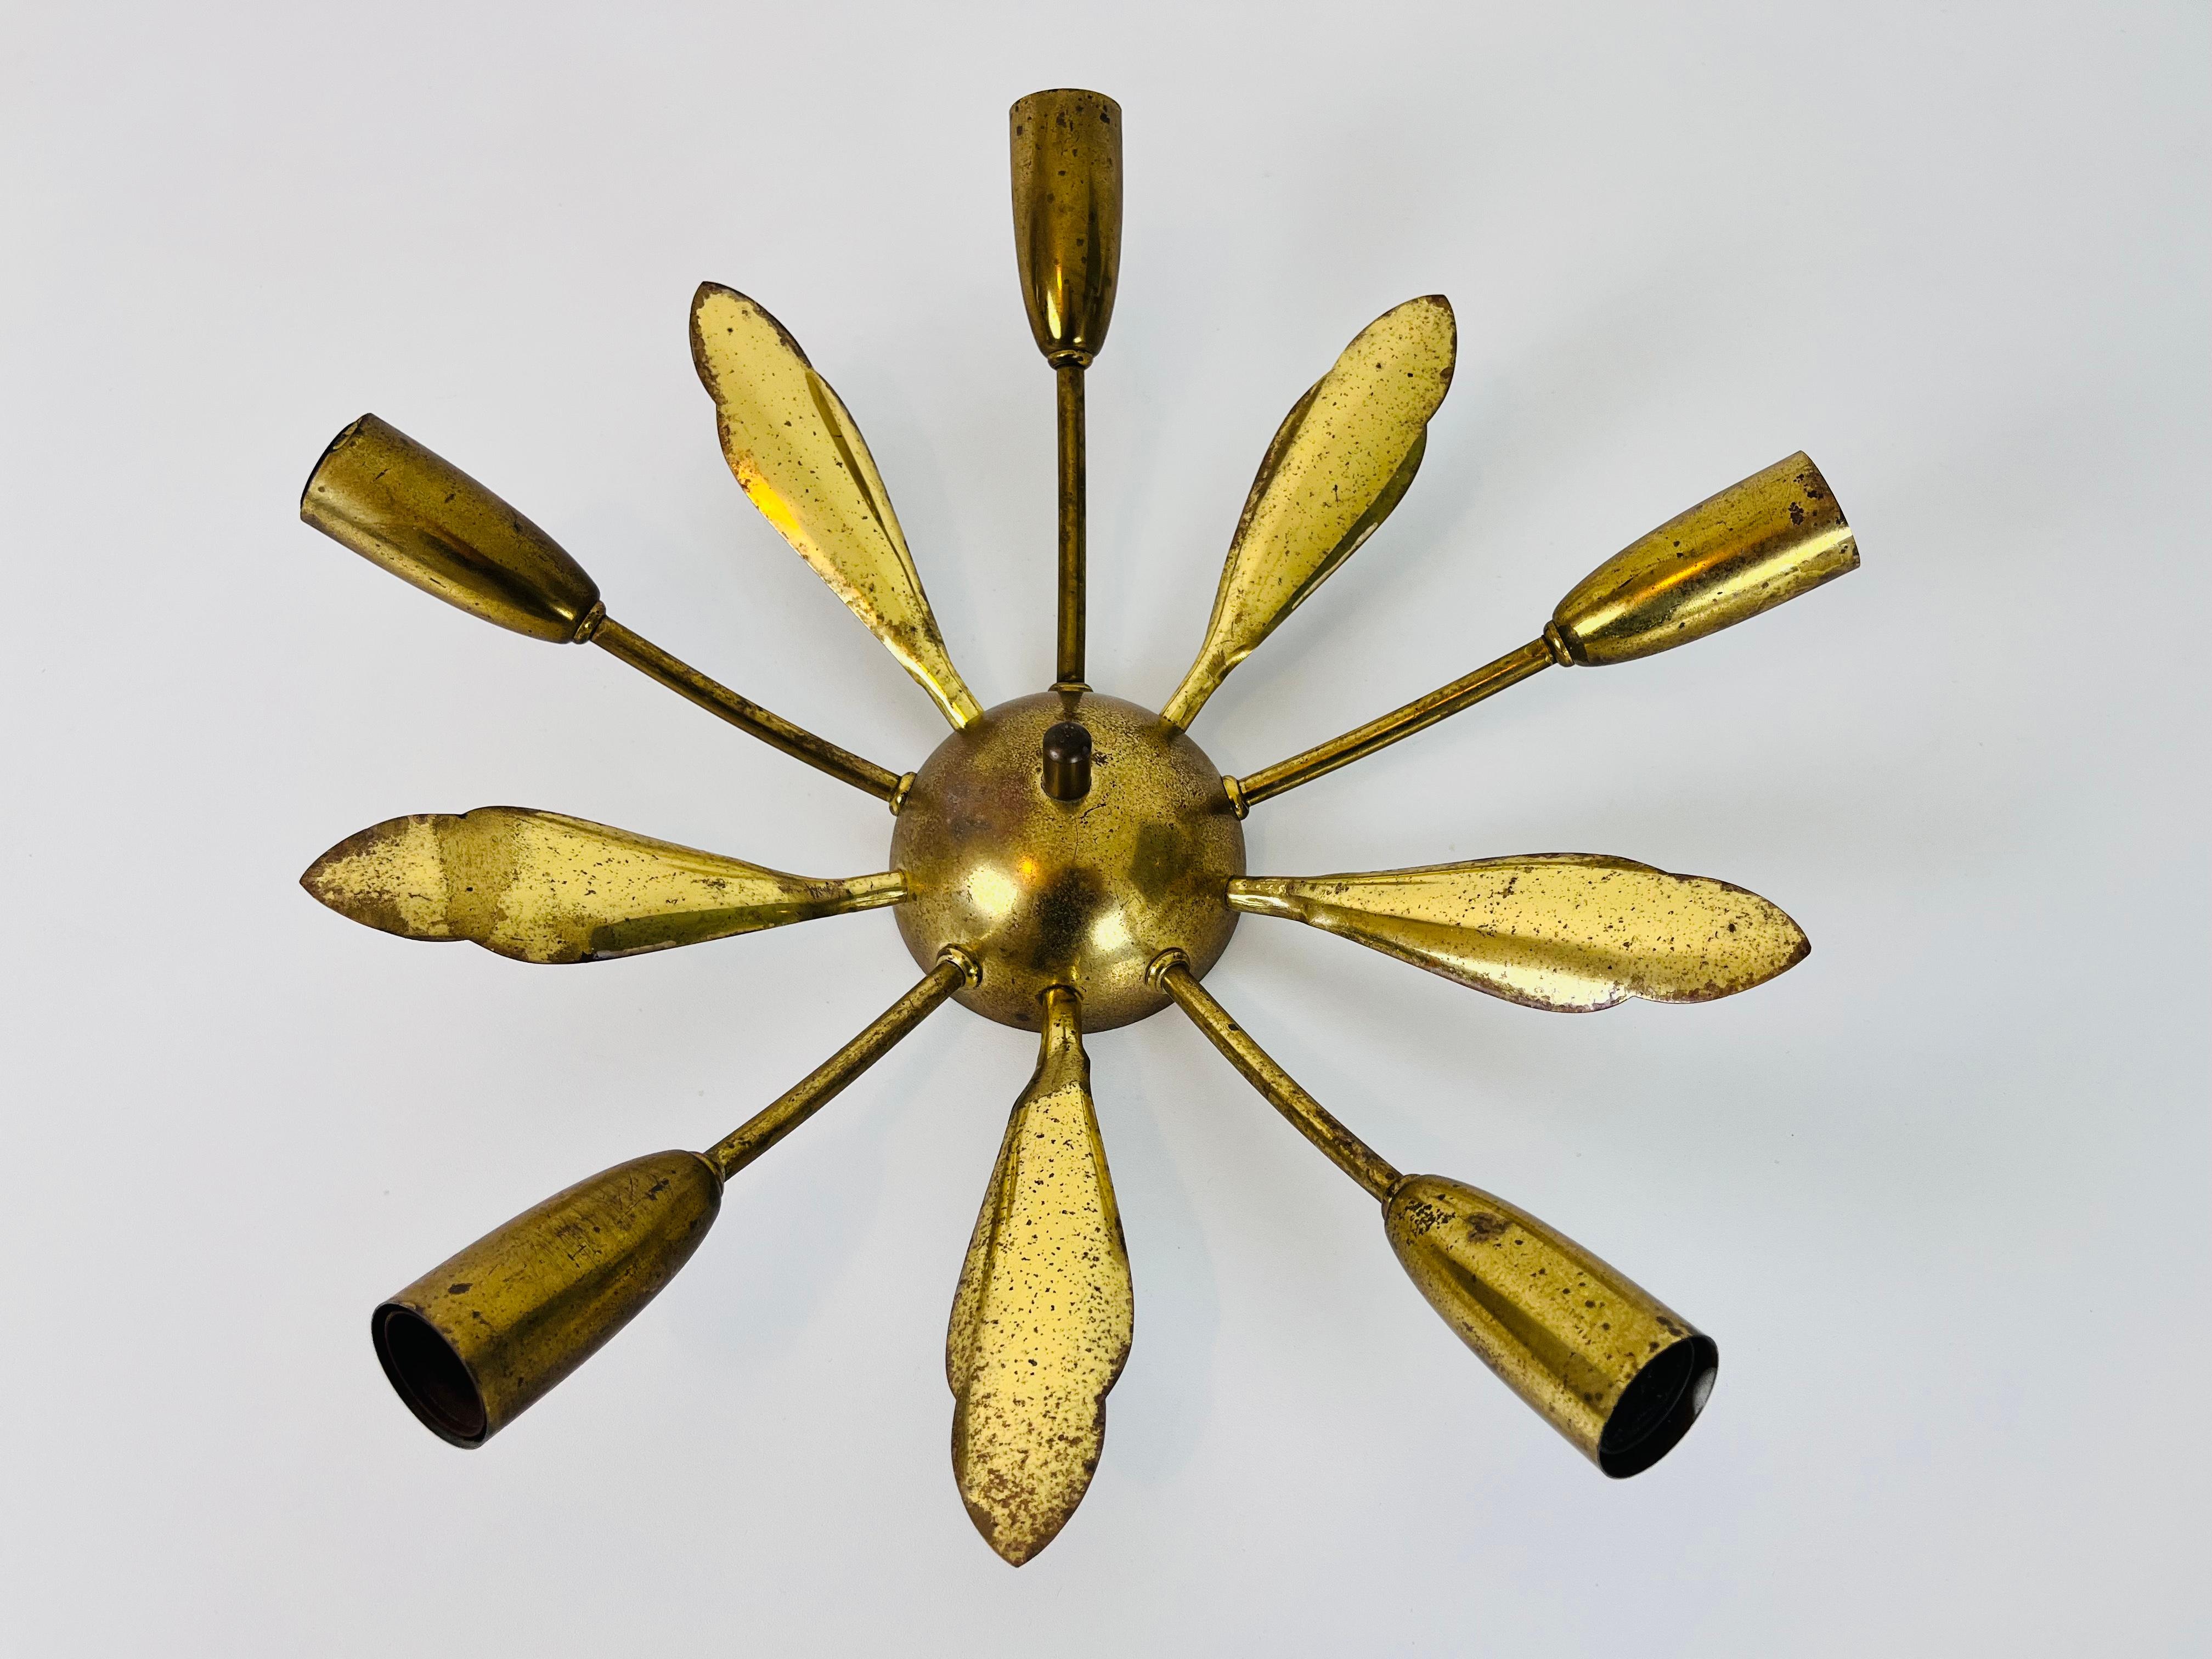 A brass Sputnik chandelier made in Germany in the 1950s. It is fascinating with its five brass arms, each of it with an E14 light bulb. The shape of the light is similar to a spider.

The light requires 5 E14 light bulbs. Works with both 120/220